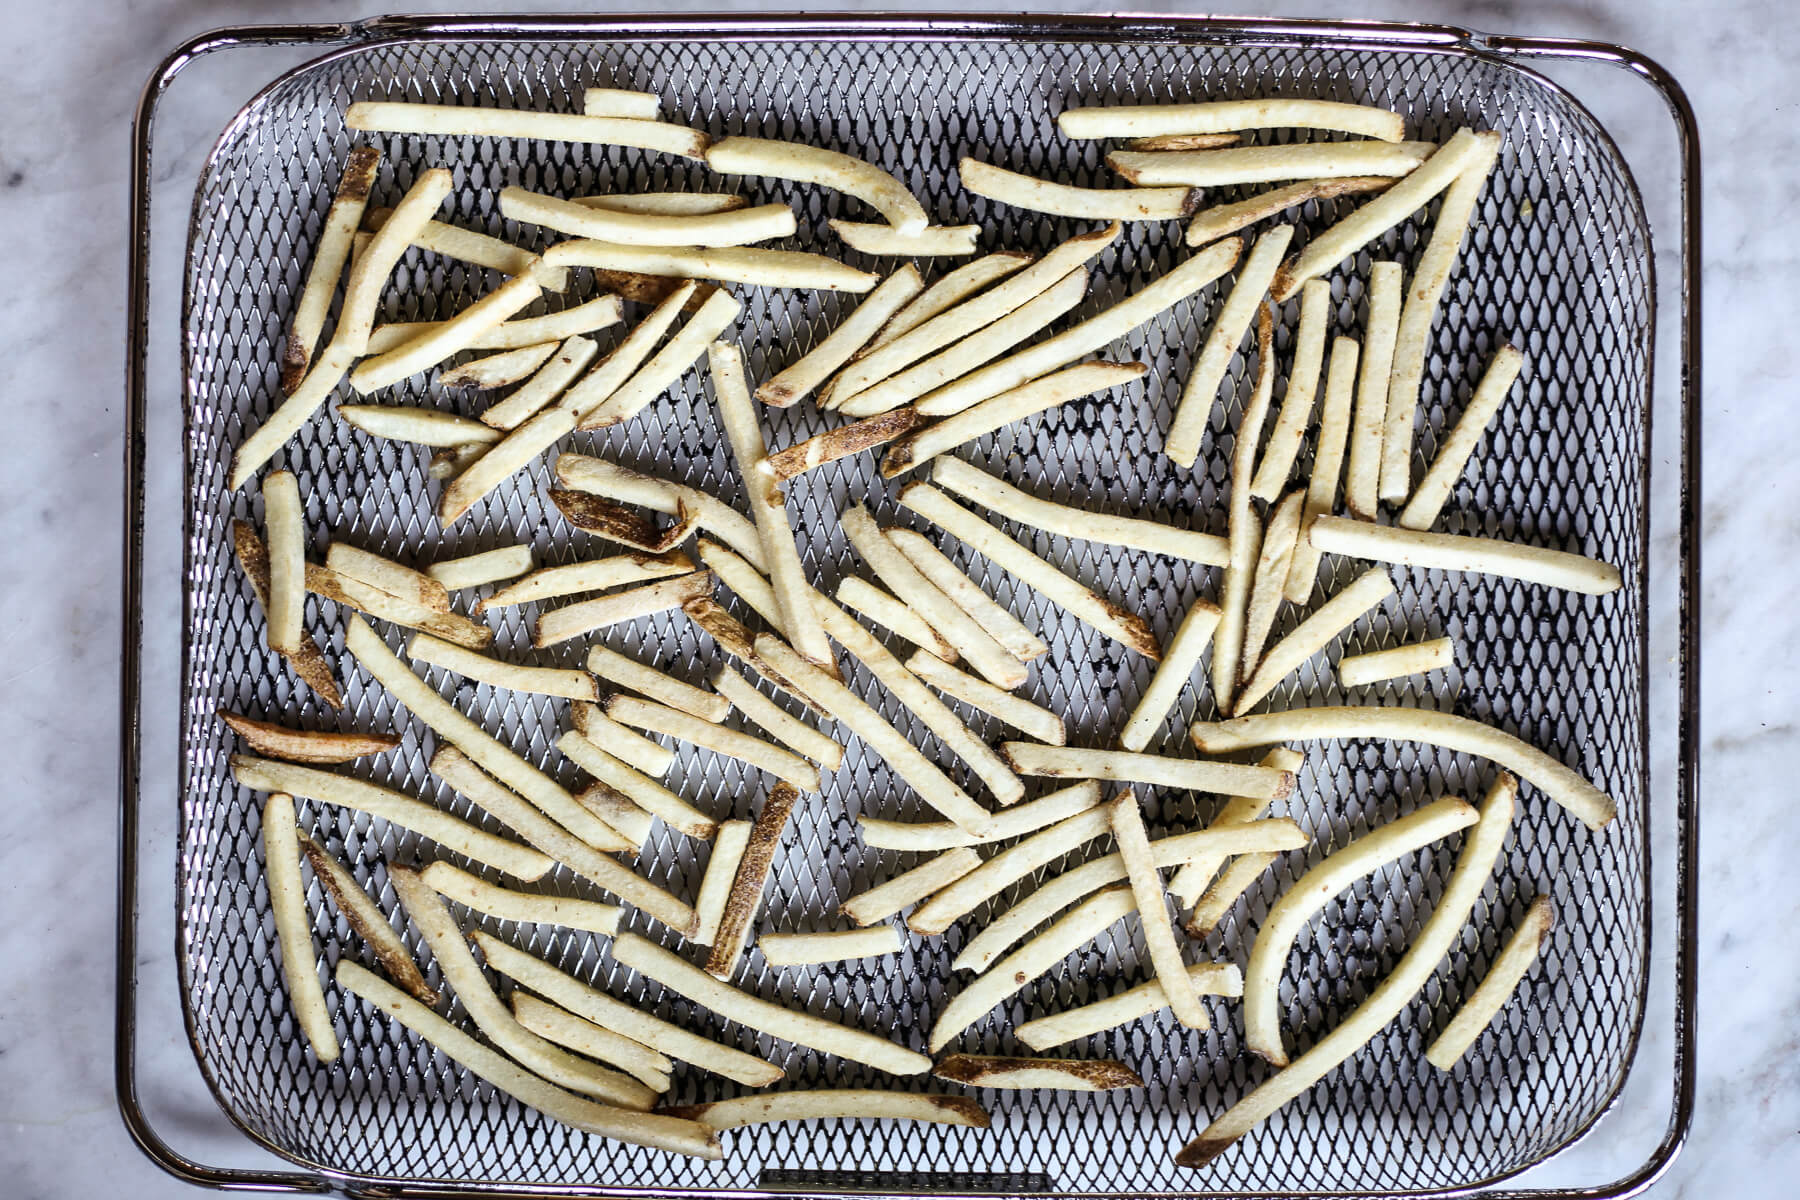 An overhead photograph of frozen French fries arranged in a air fryer basket.